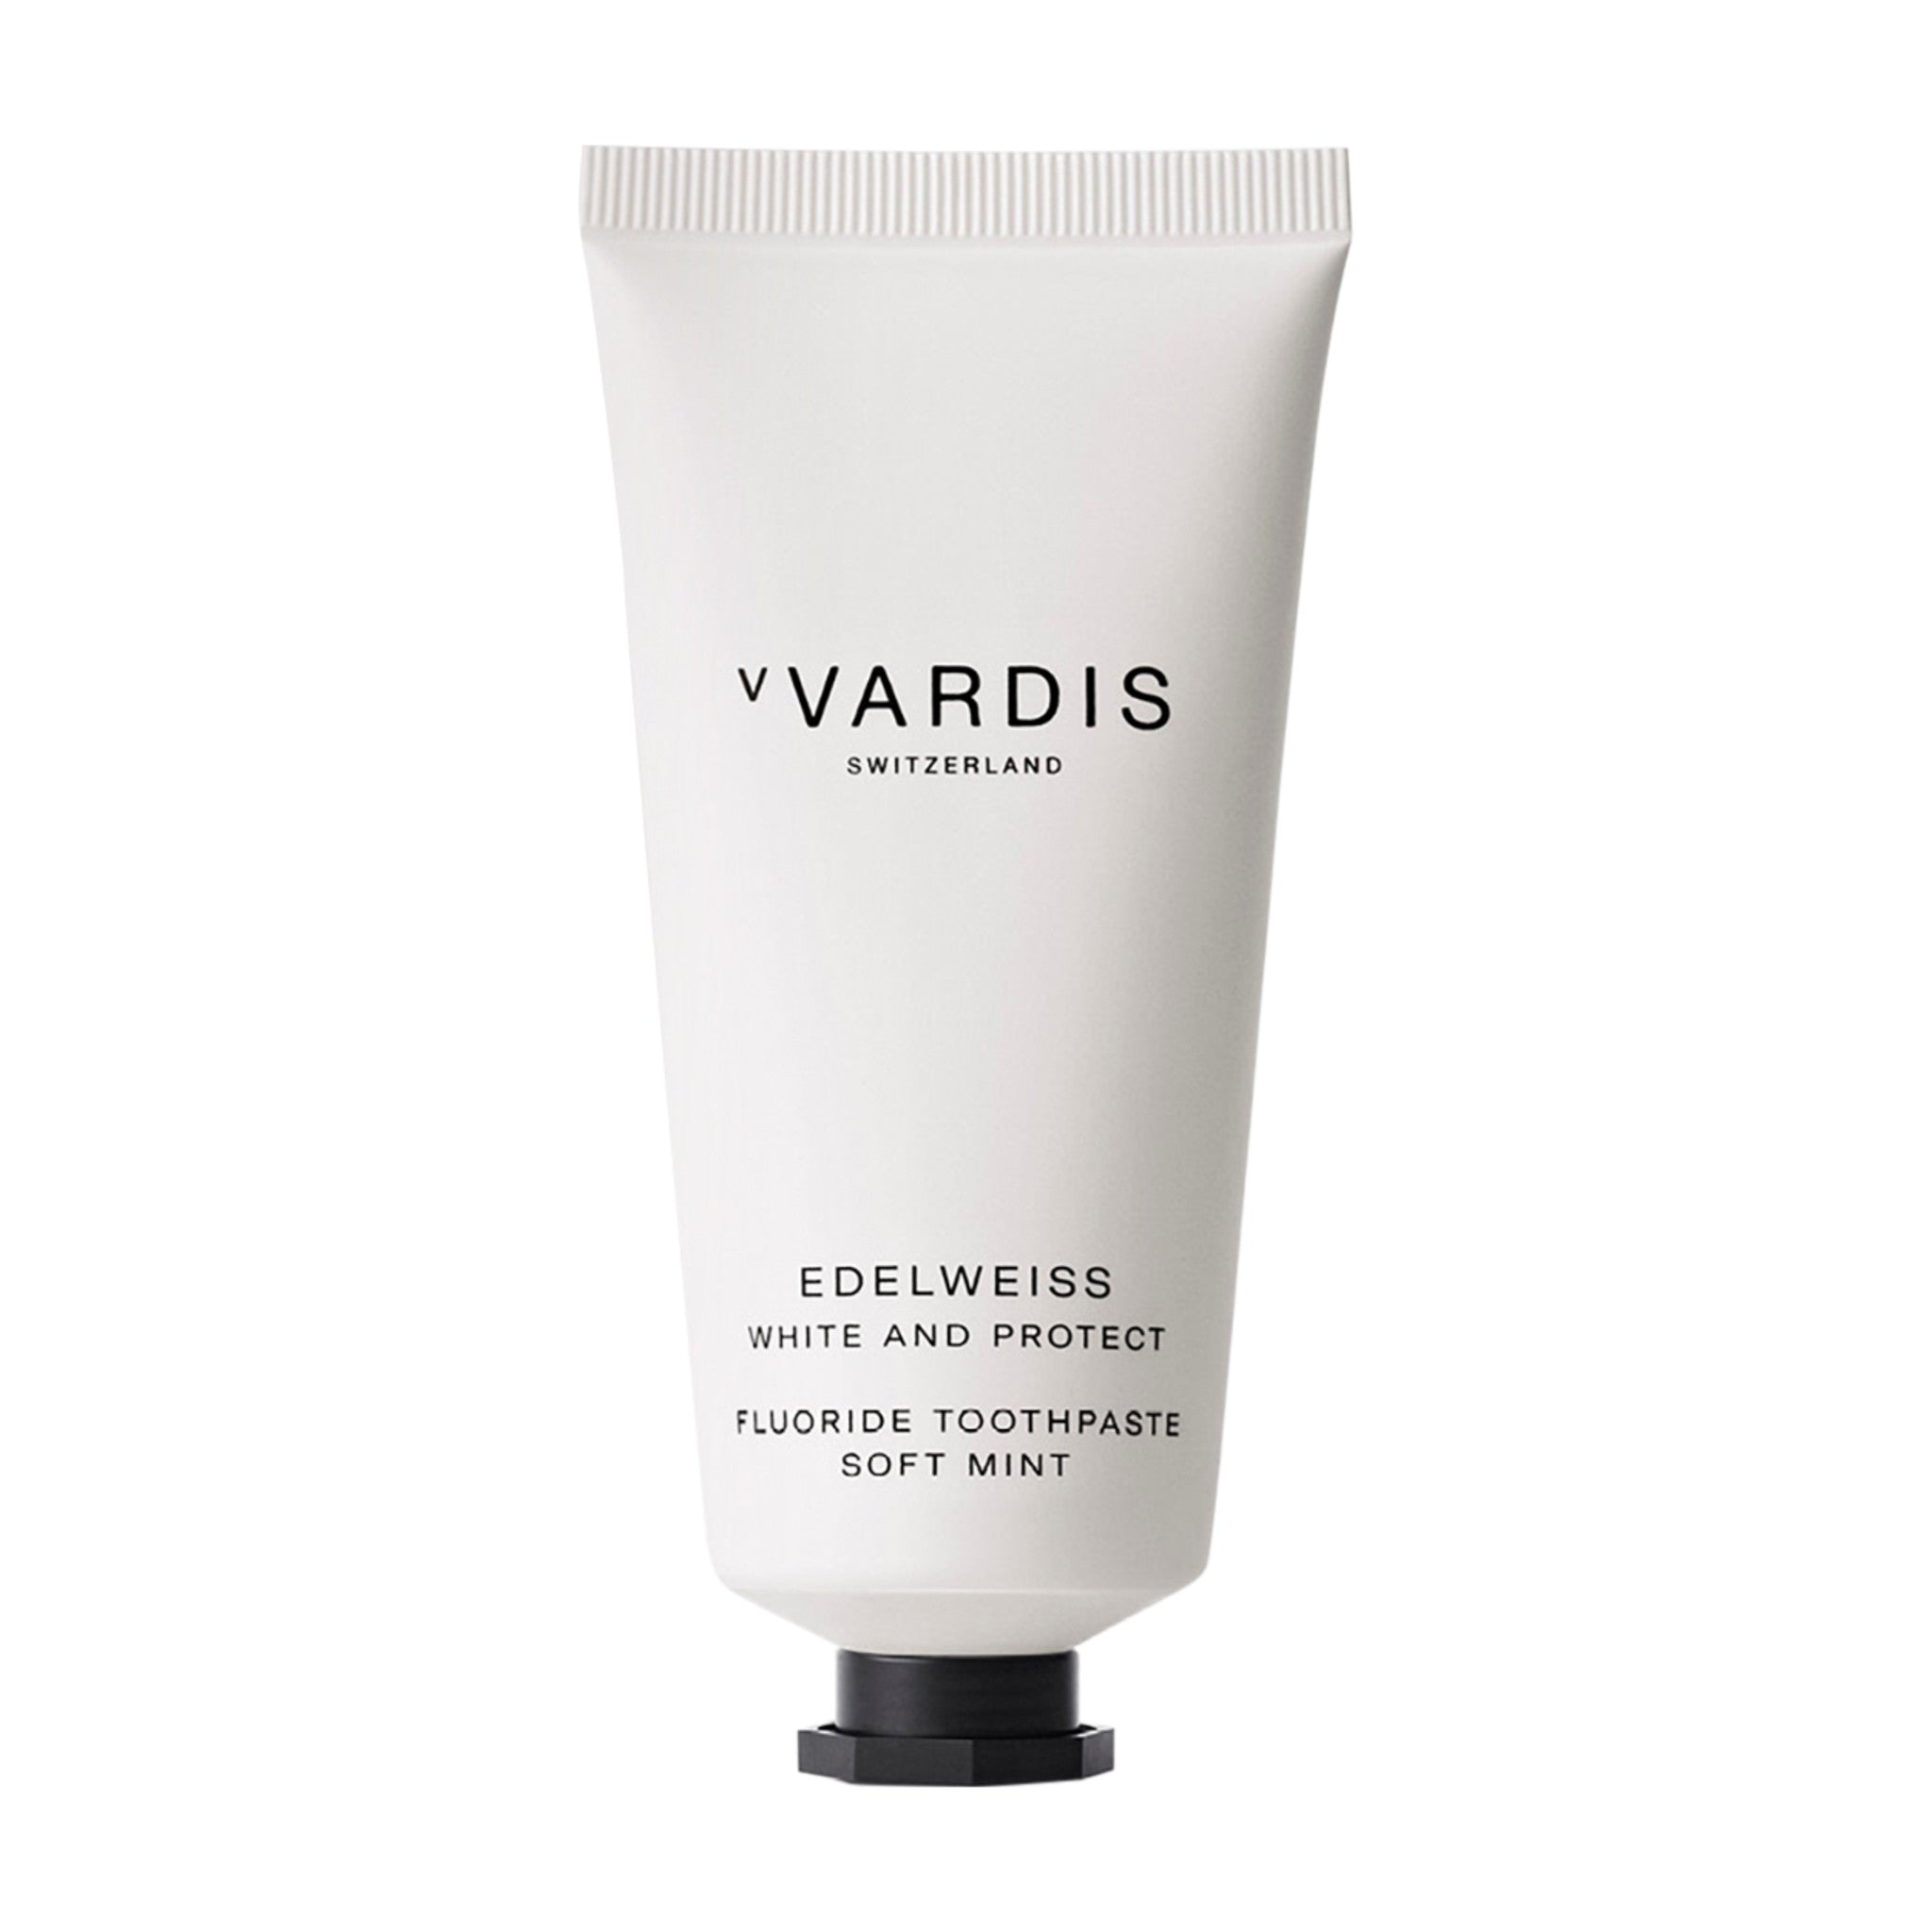 vVardis New White Enamel Anti-Aging Toothpaste Color/Shade variant: Soft Mint main image.